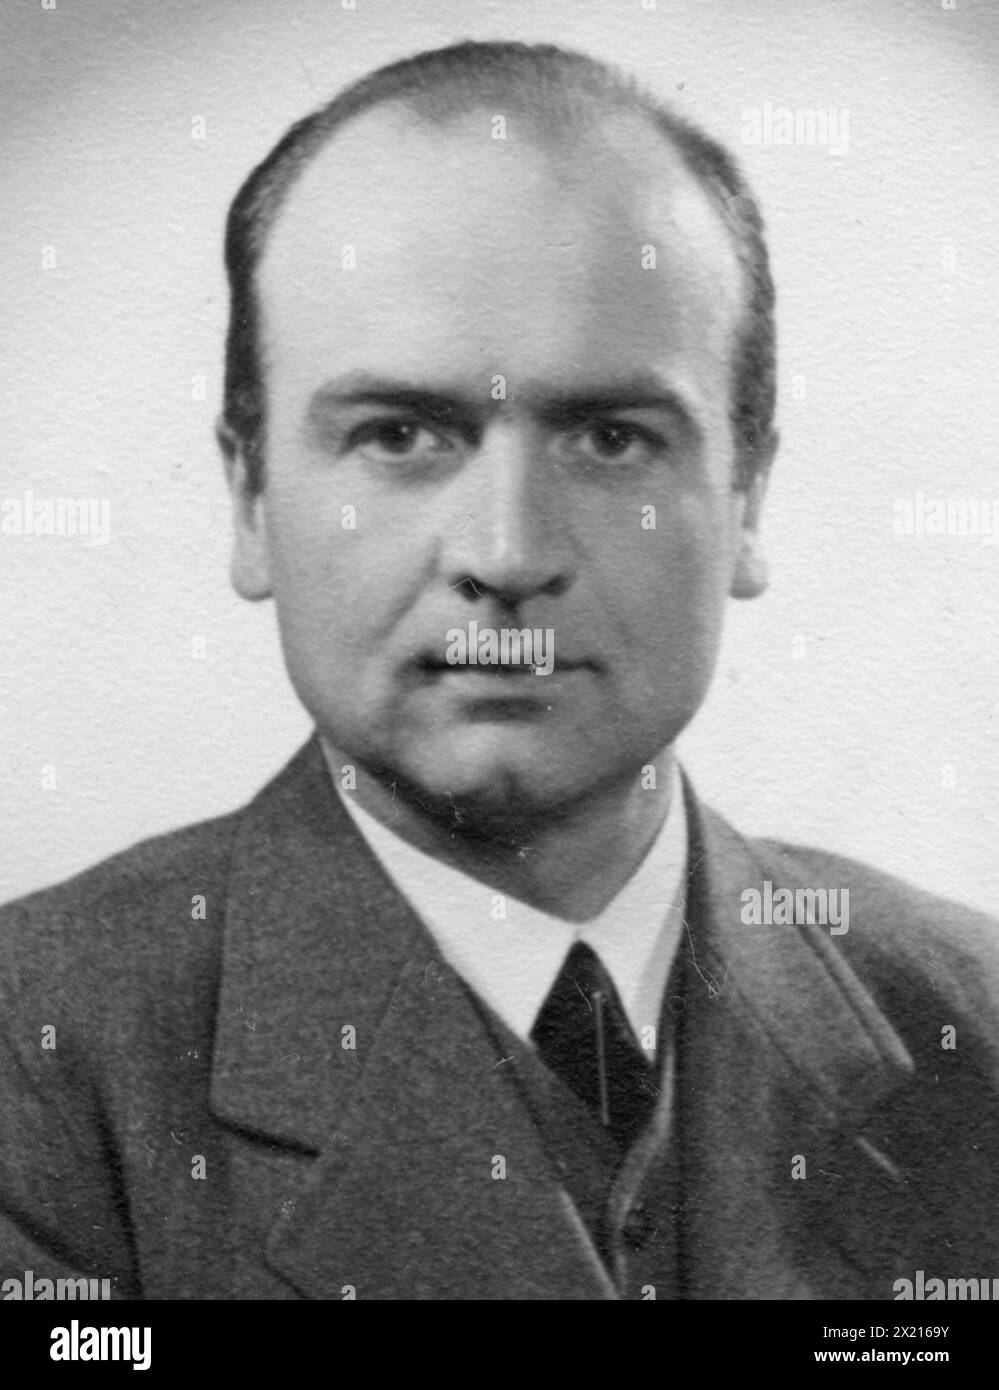 Strohmeyer, Curt, German writer, 1930s, ADDITIONAL-RIGHTS-CLEARANCE-INFO-NOT-AVAILABLE Stock Photo